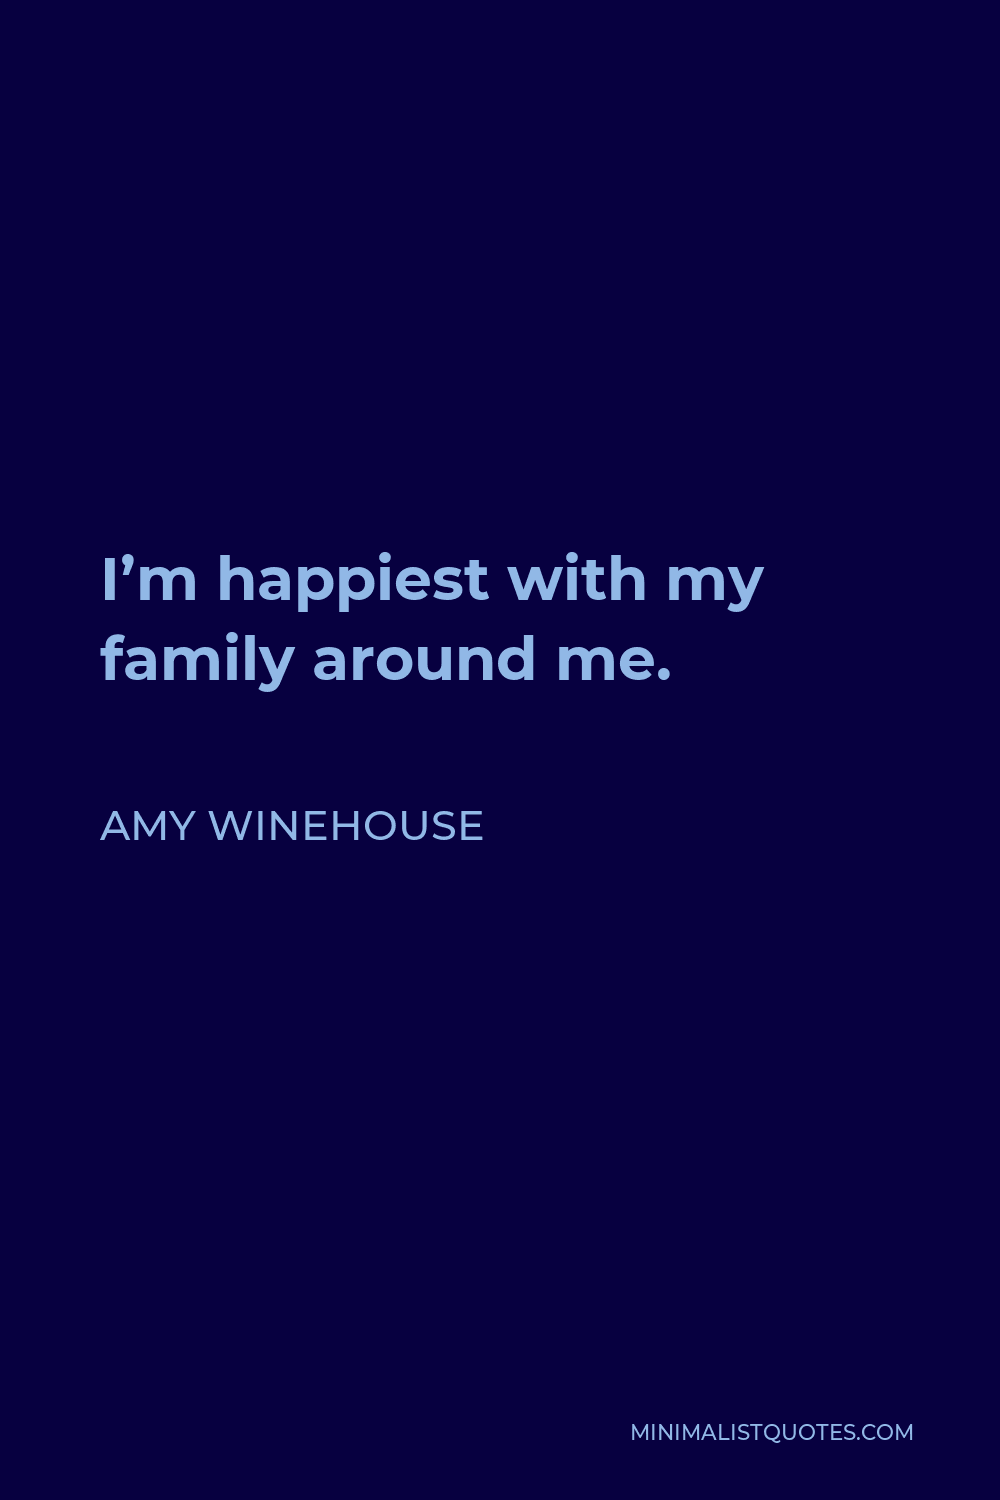 Amy Winehouse Quote - I’m happiest with my family around me.